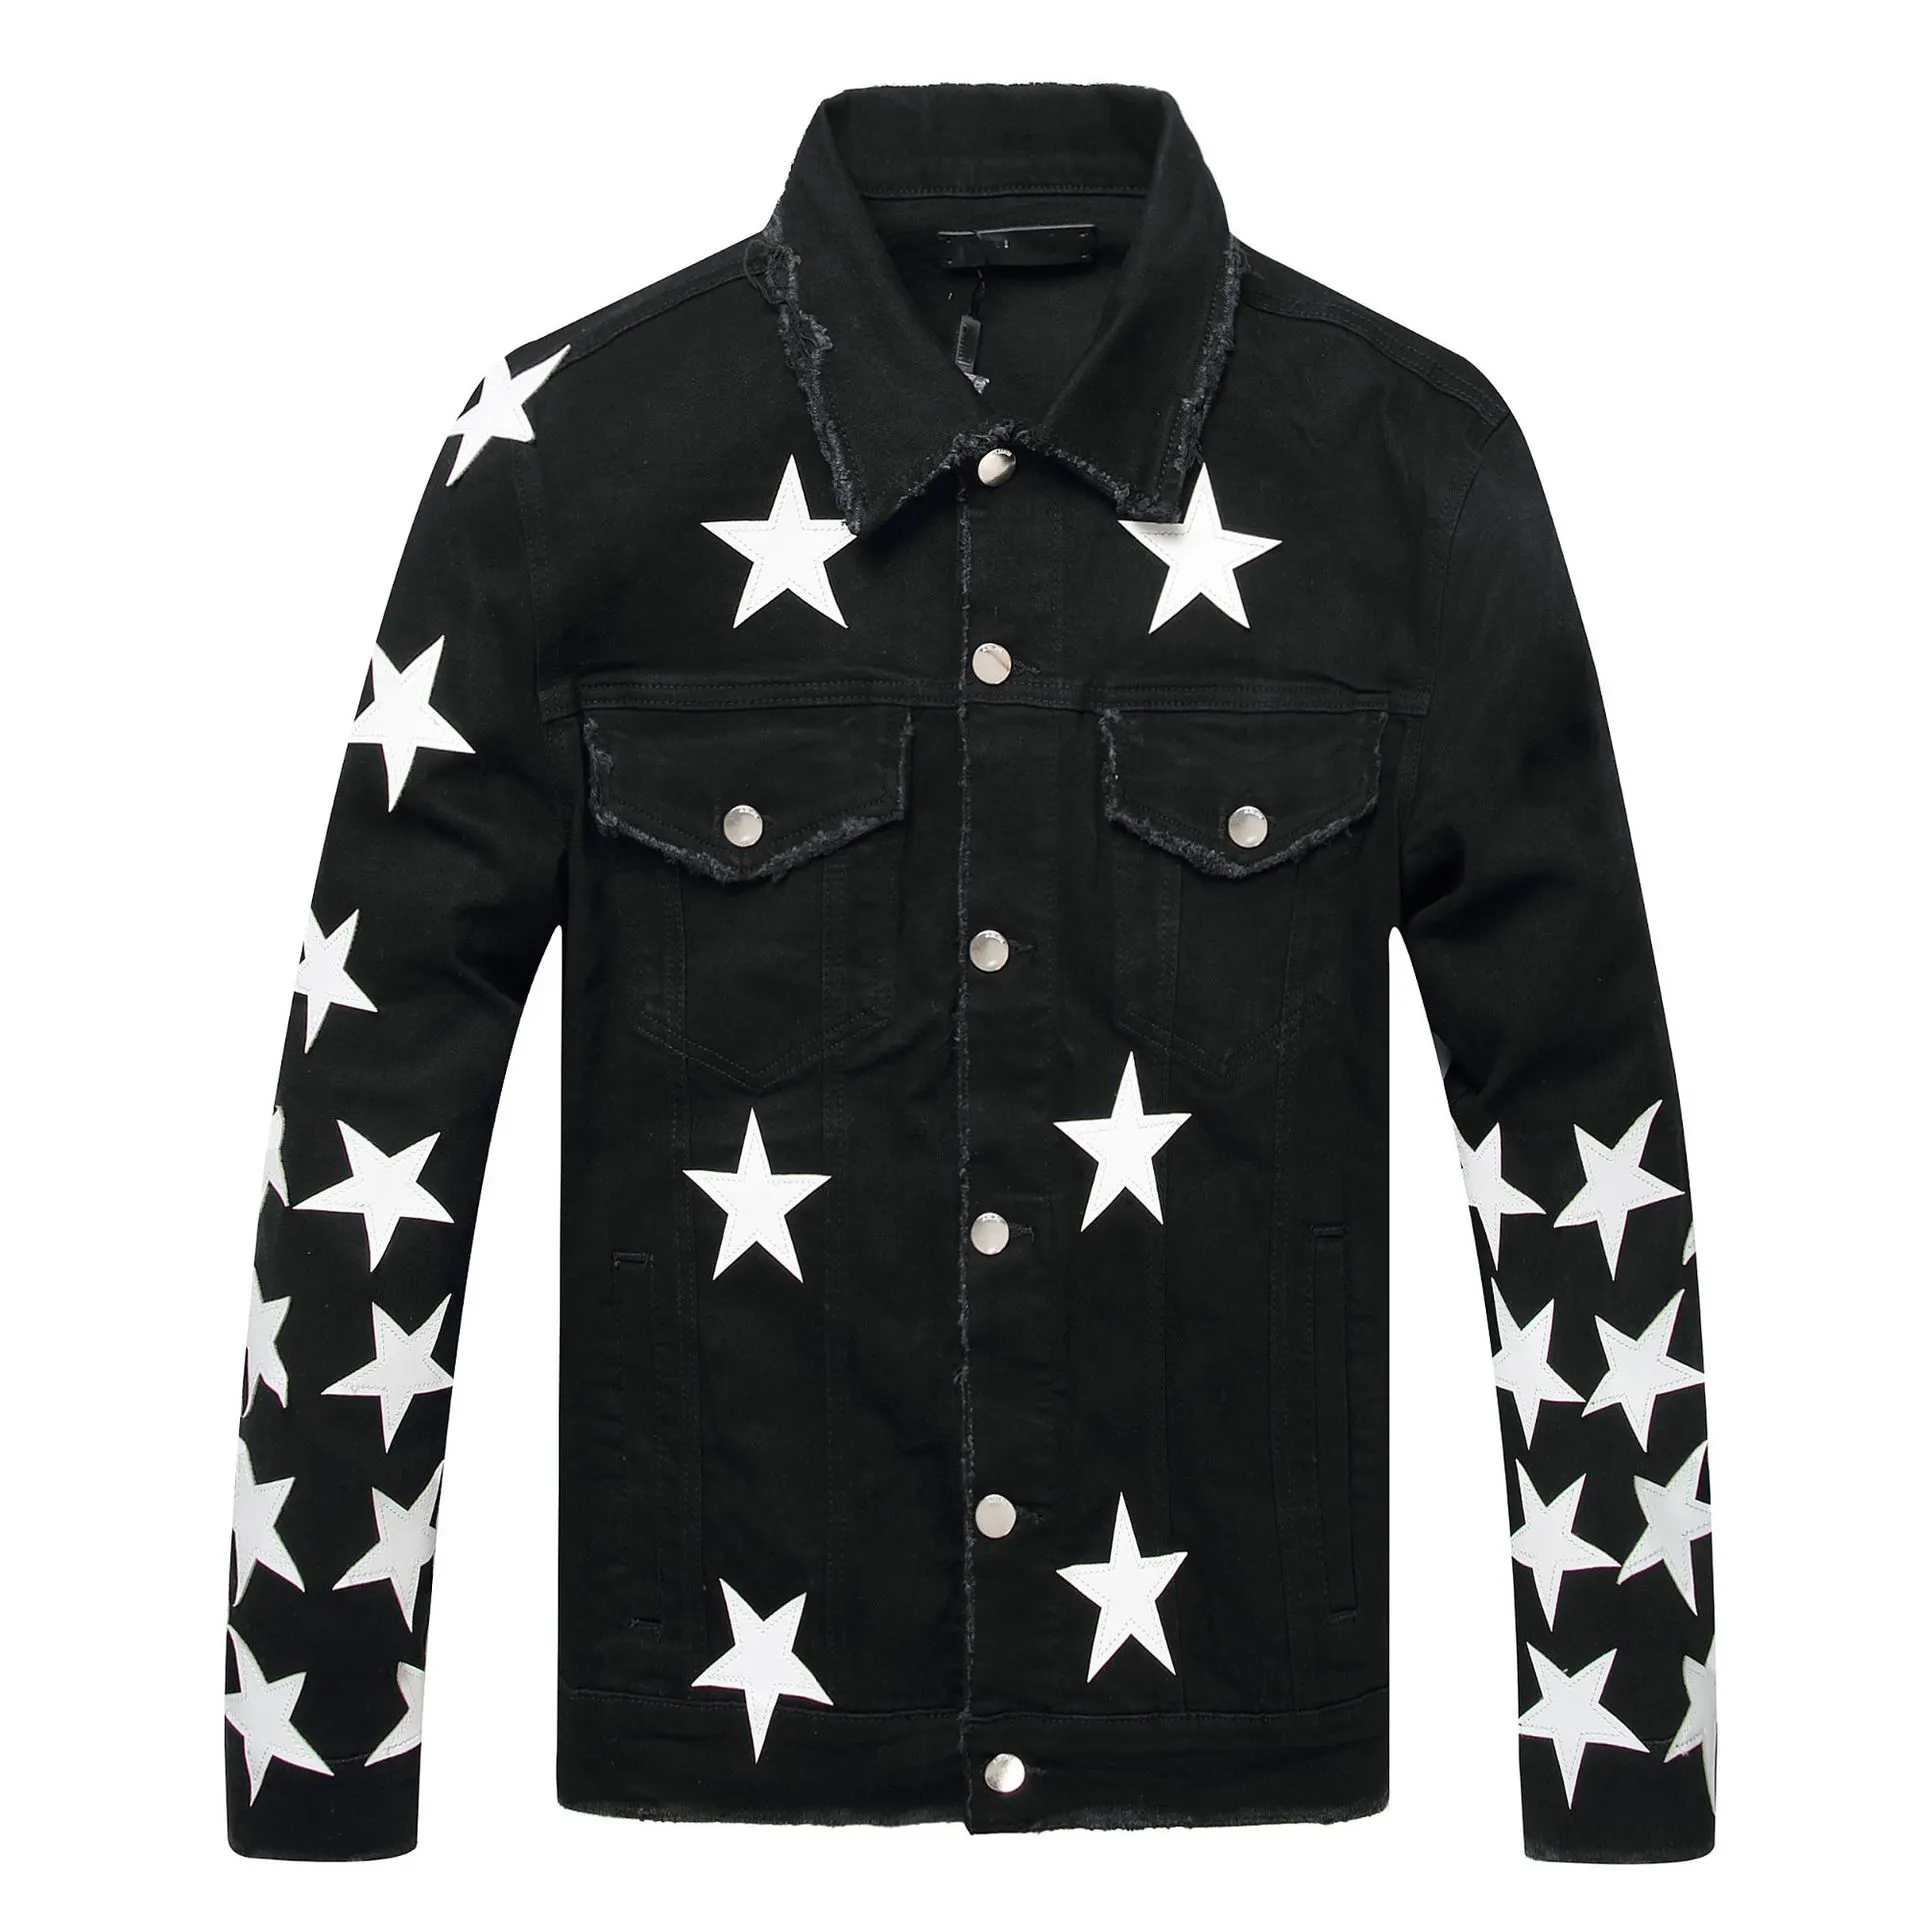 New arrival fashion streetwear ripped button front branded jeans jacket mens designer luxury quality denim jacket with stars